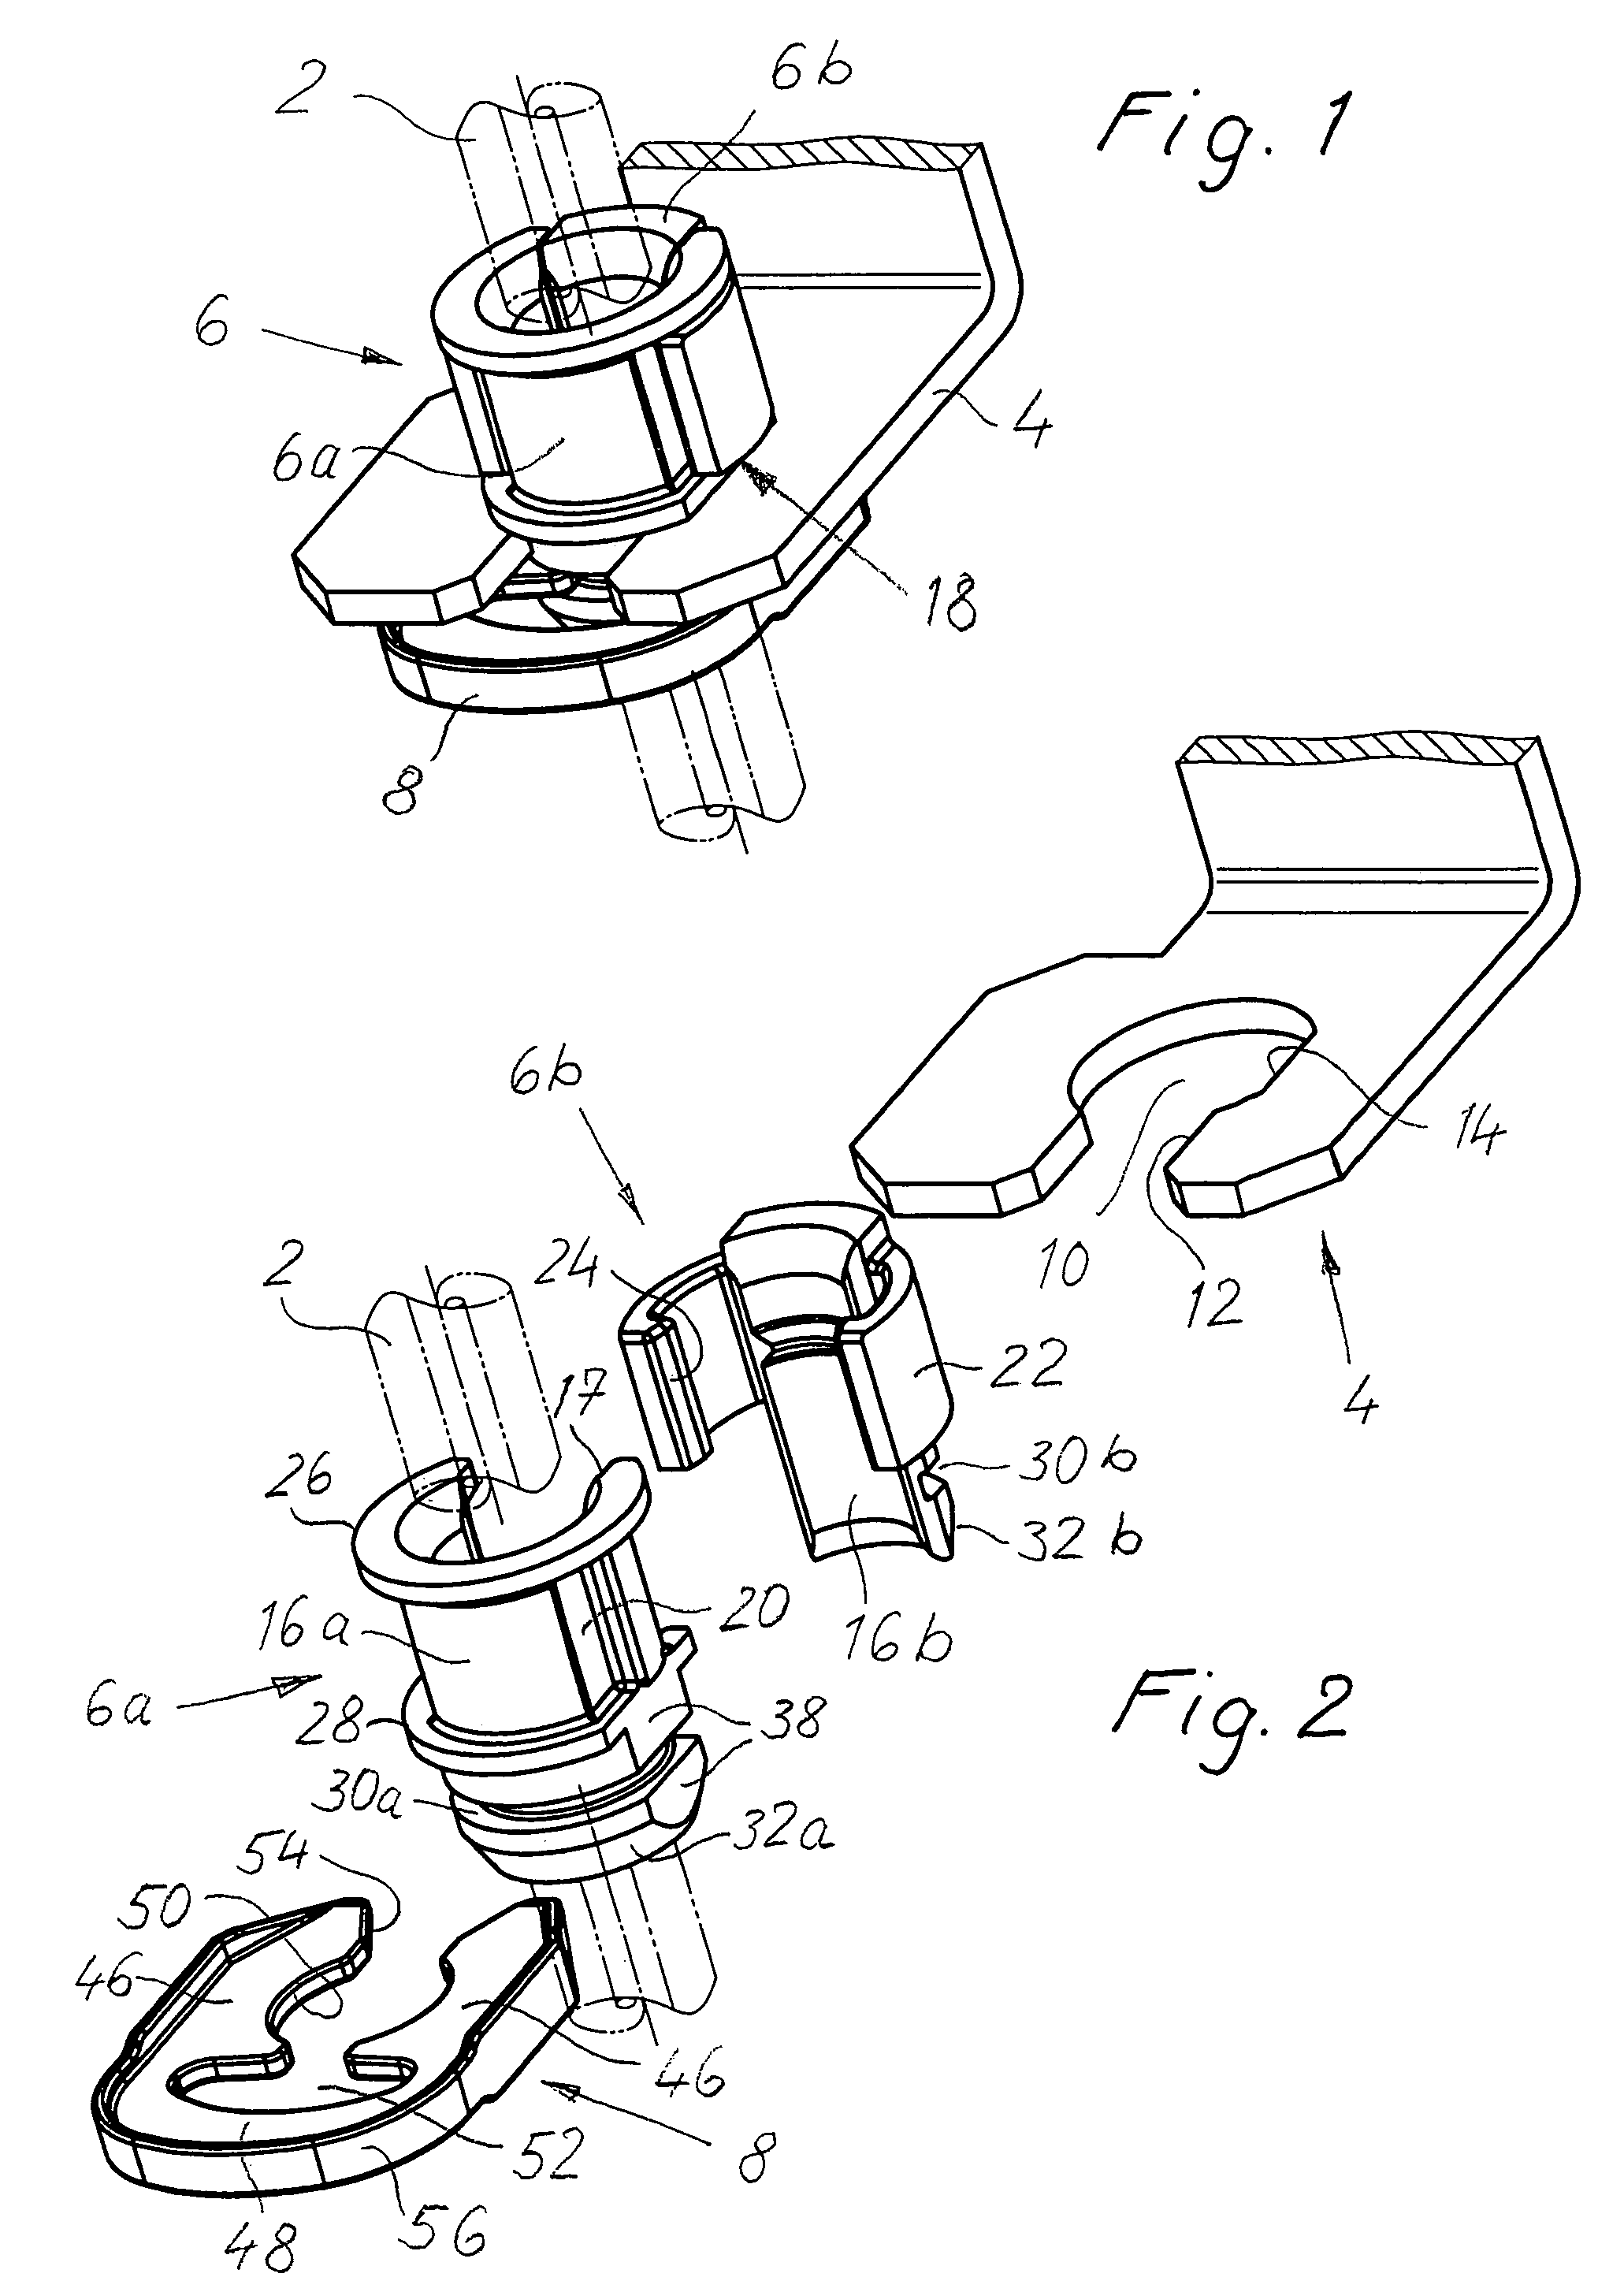 Joining assembly for fixing a tube at a holder